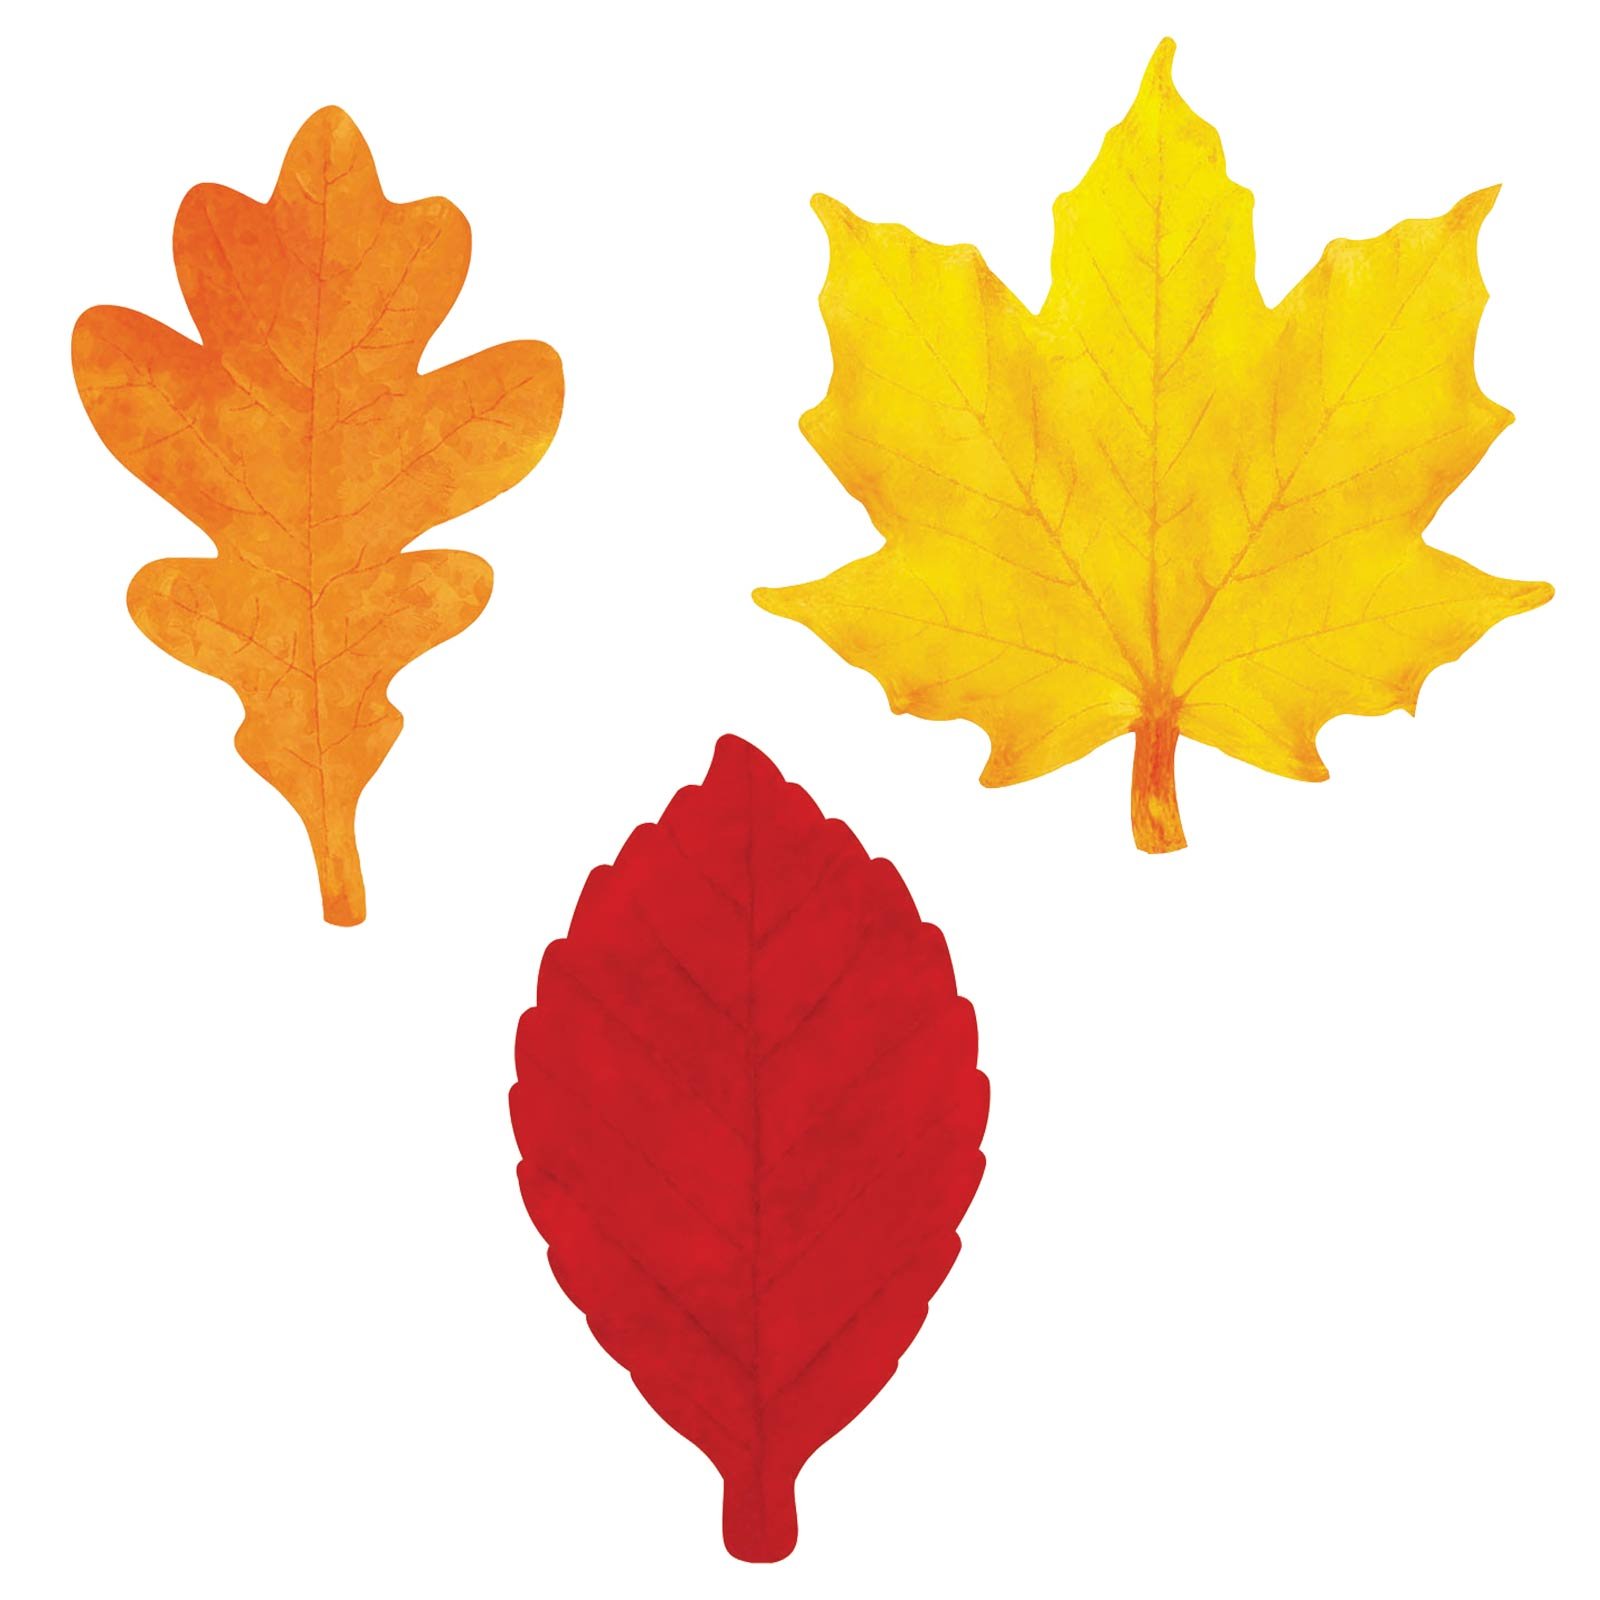 Apple Leaf Template Perfect for Your Craft and Design Projects